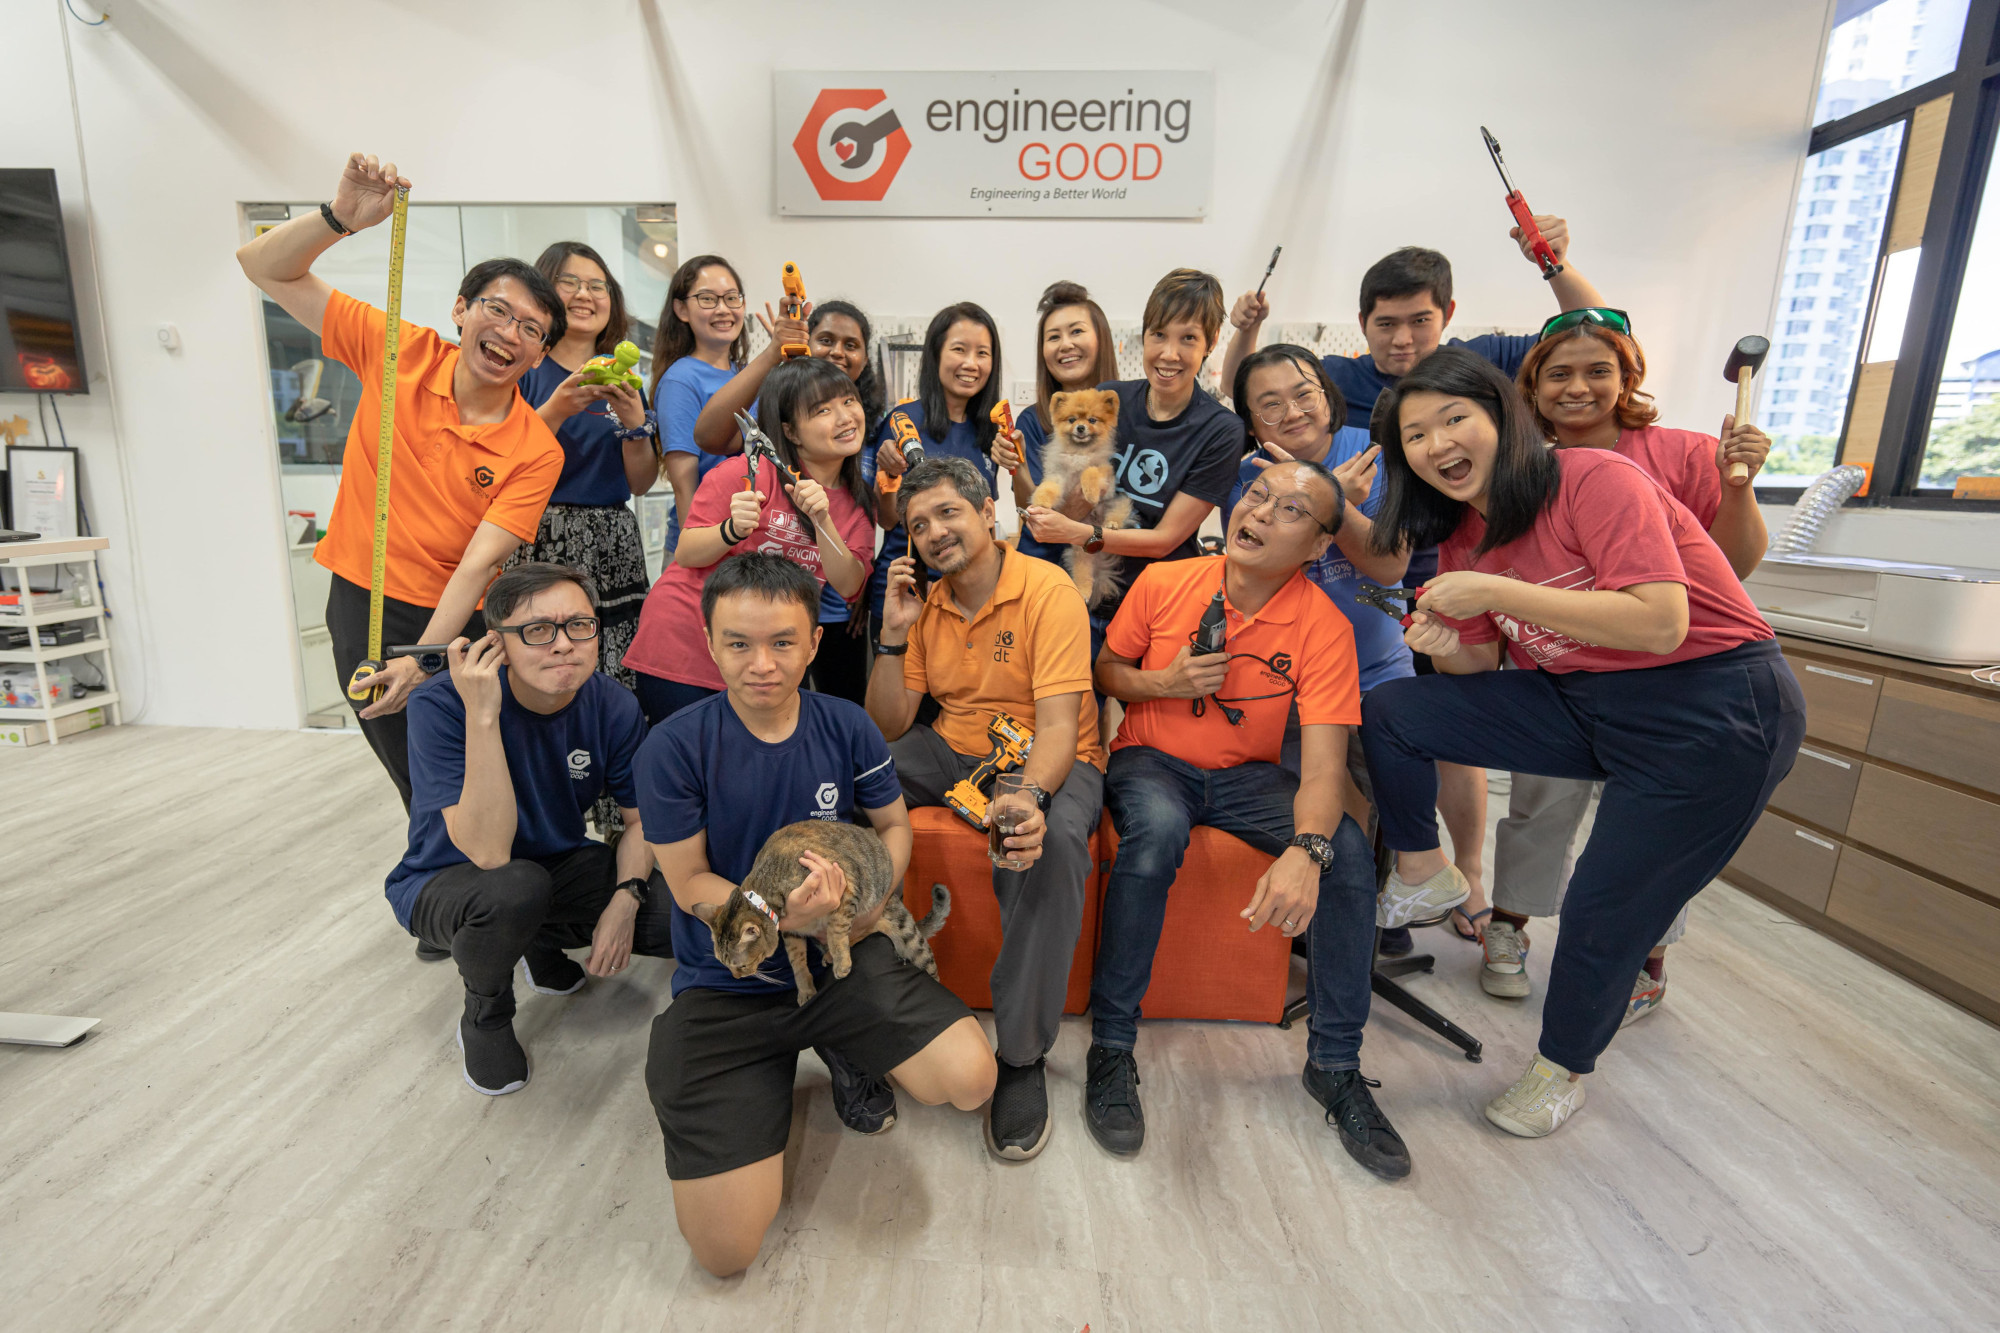 Team photo at Engineering Good, a tech and engineering charity in Singapore that empowers vulnerable and low-income communities.